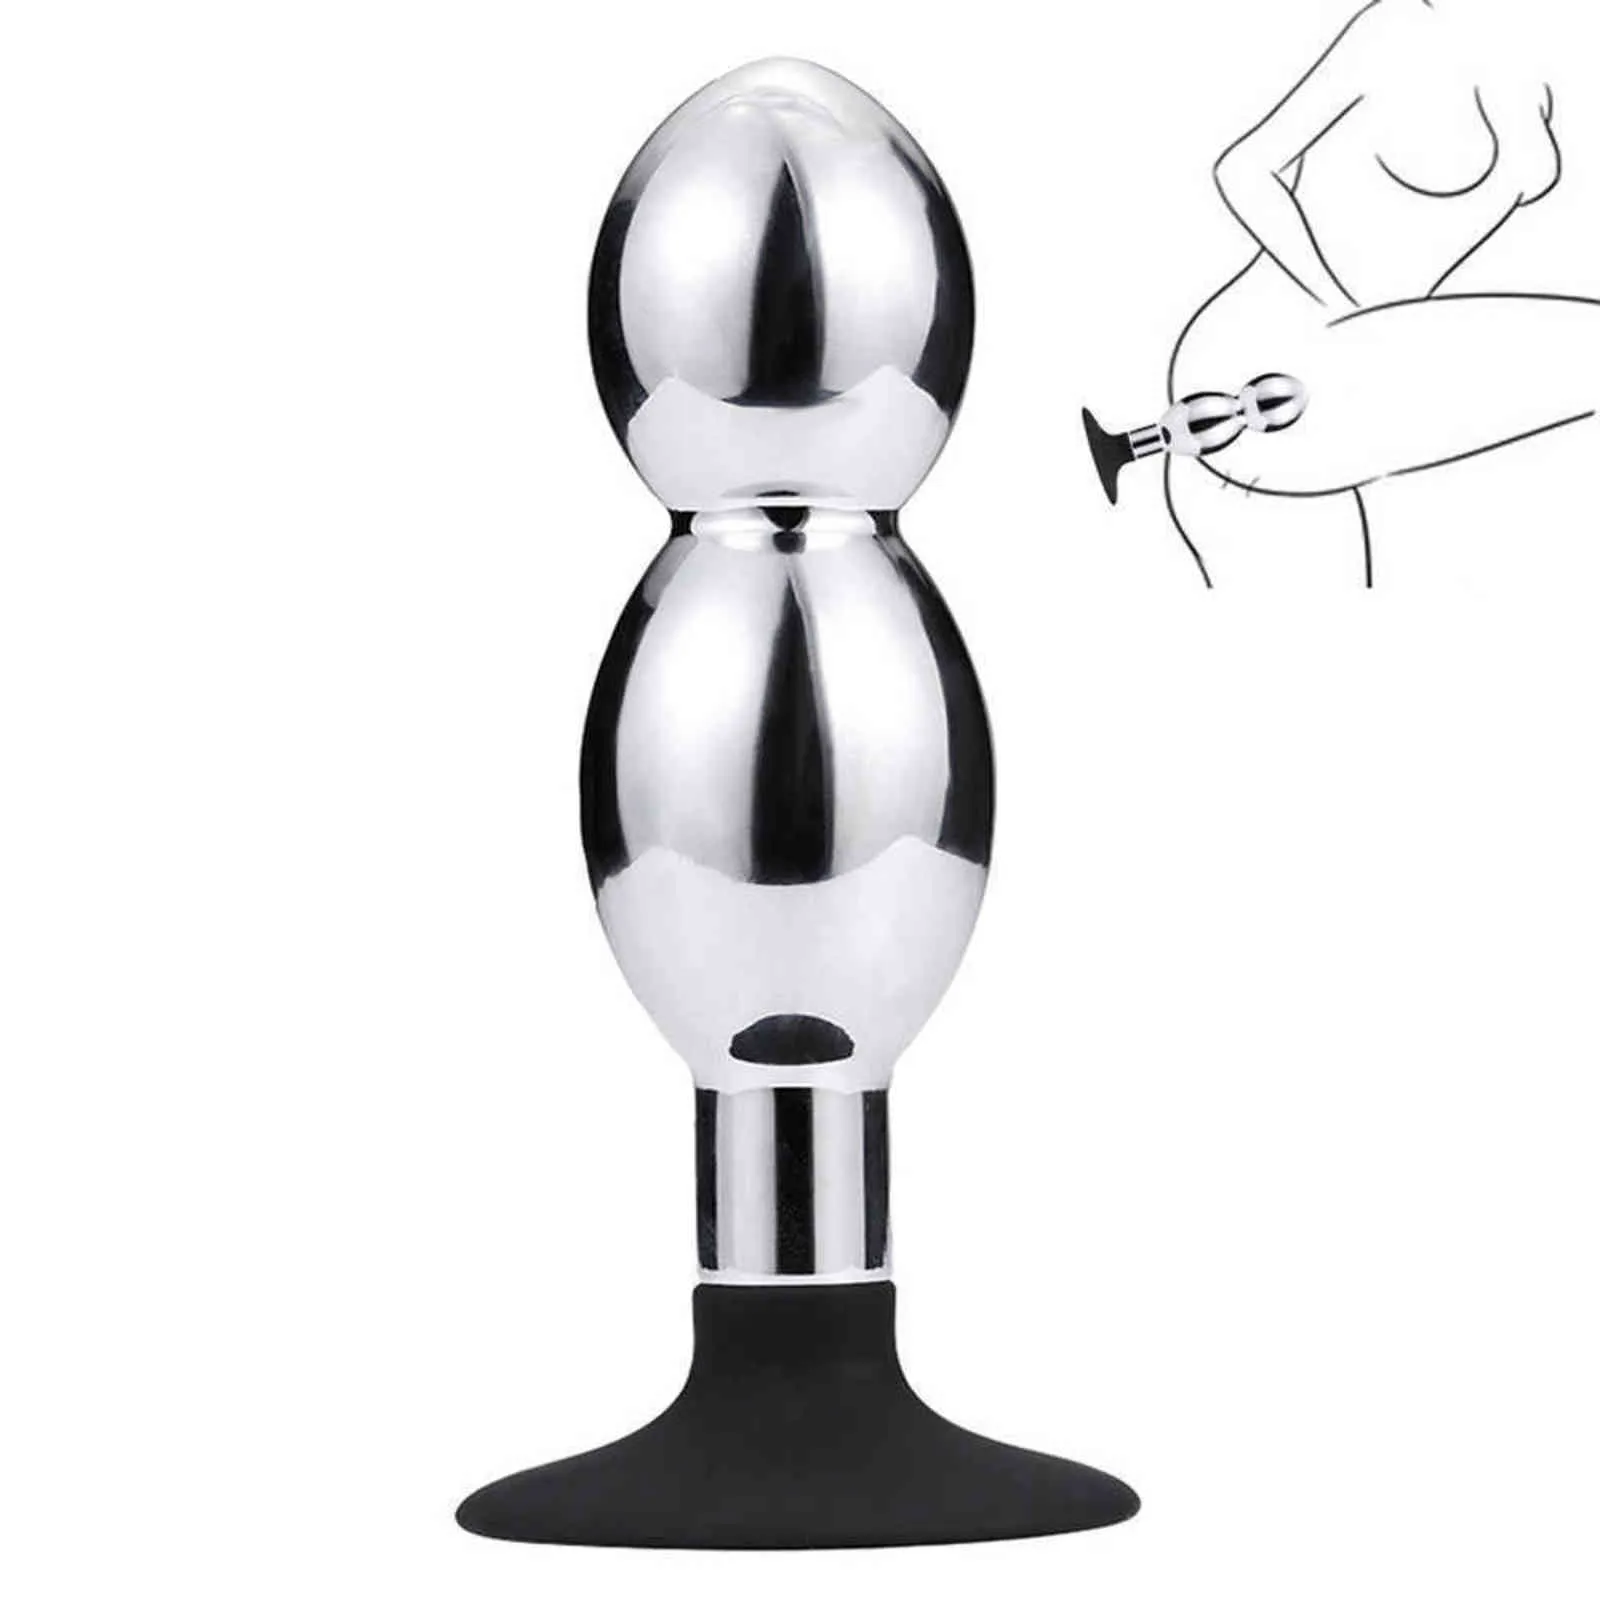 Metal Anal Plug Stainless Steel Anal Beads Dilatador Dildo Prostate Massager Erotic Sex Toys Products Butt Plug Adult Buttplu L1 Y1029